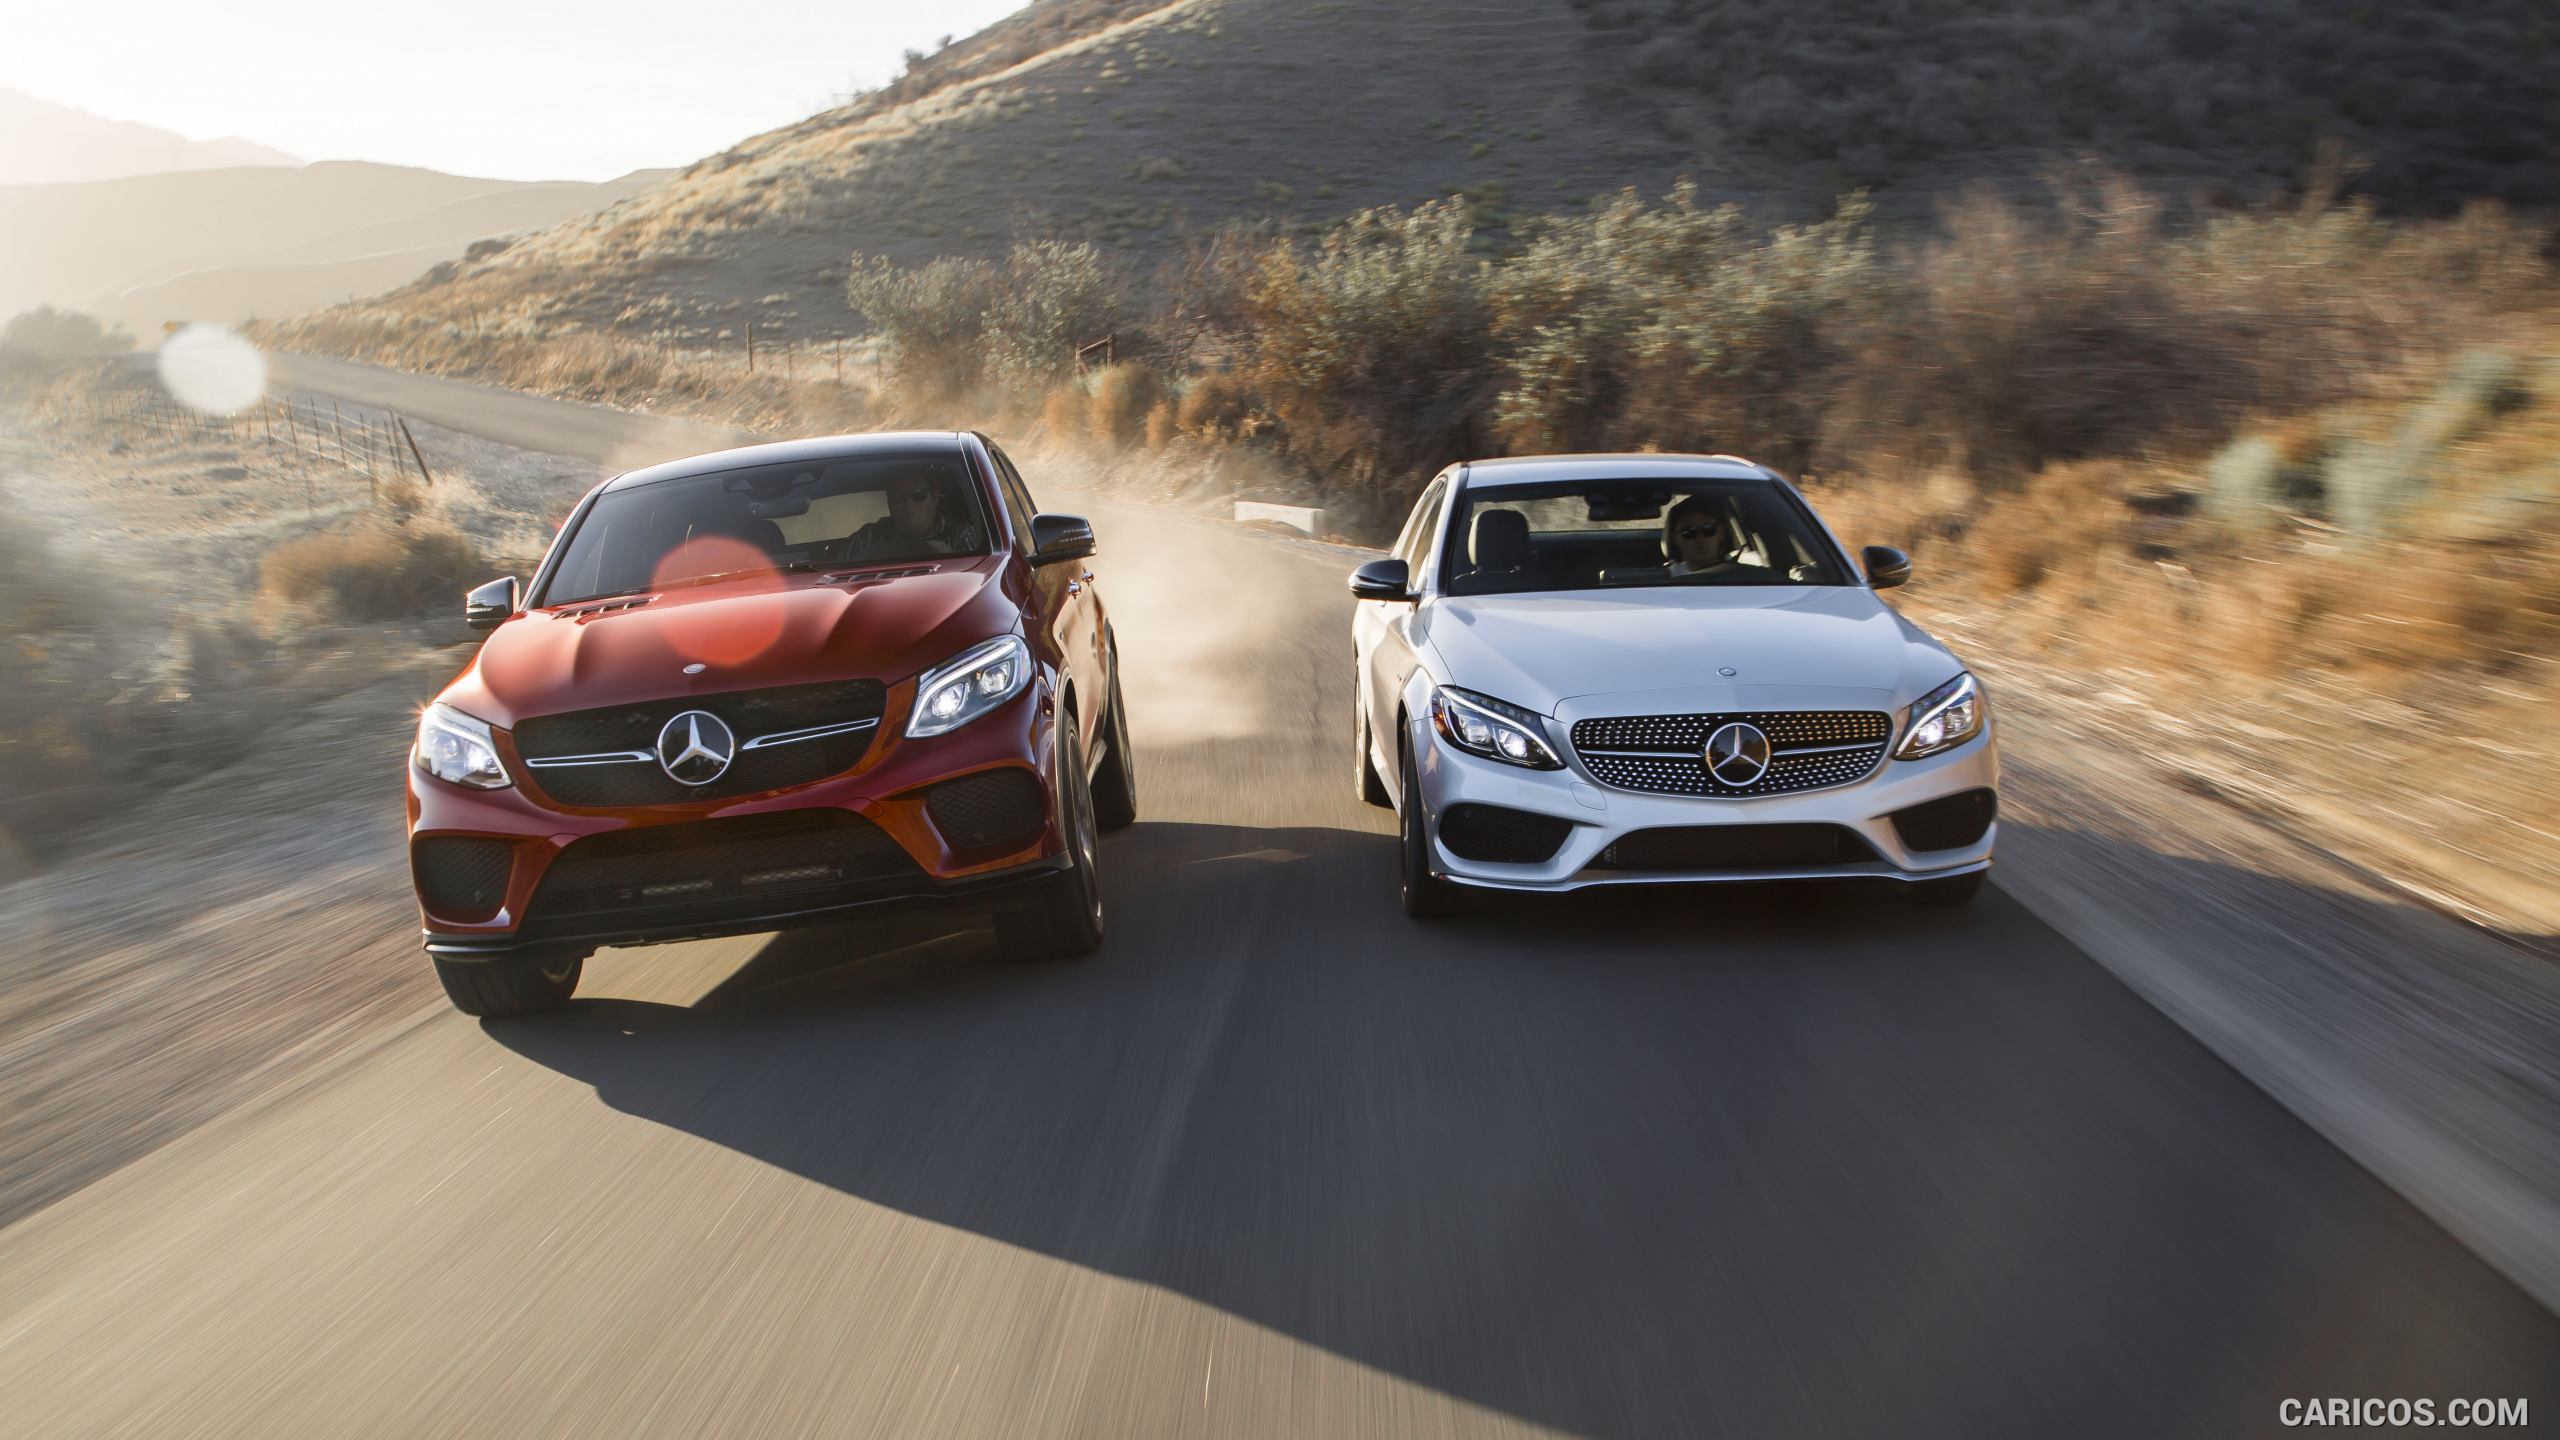 2016 Mercedes-Benz GLE 450 AMG Coupe 4MATIC (US-Spec) and C450 AMG - Front, #102 of 115